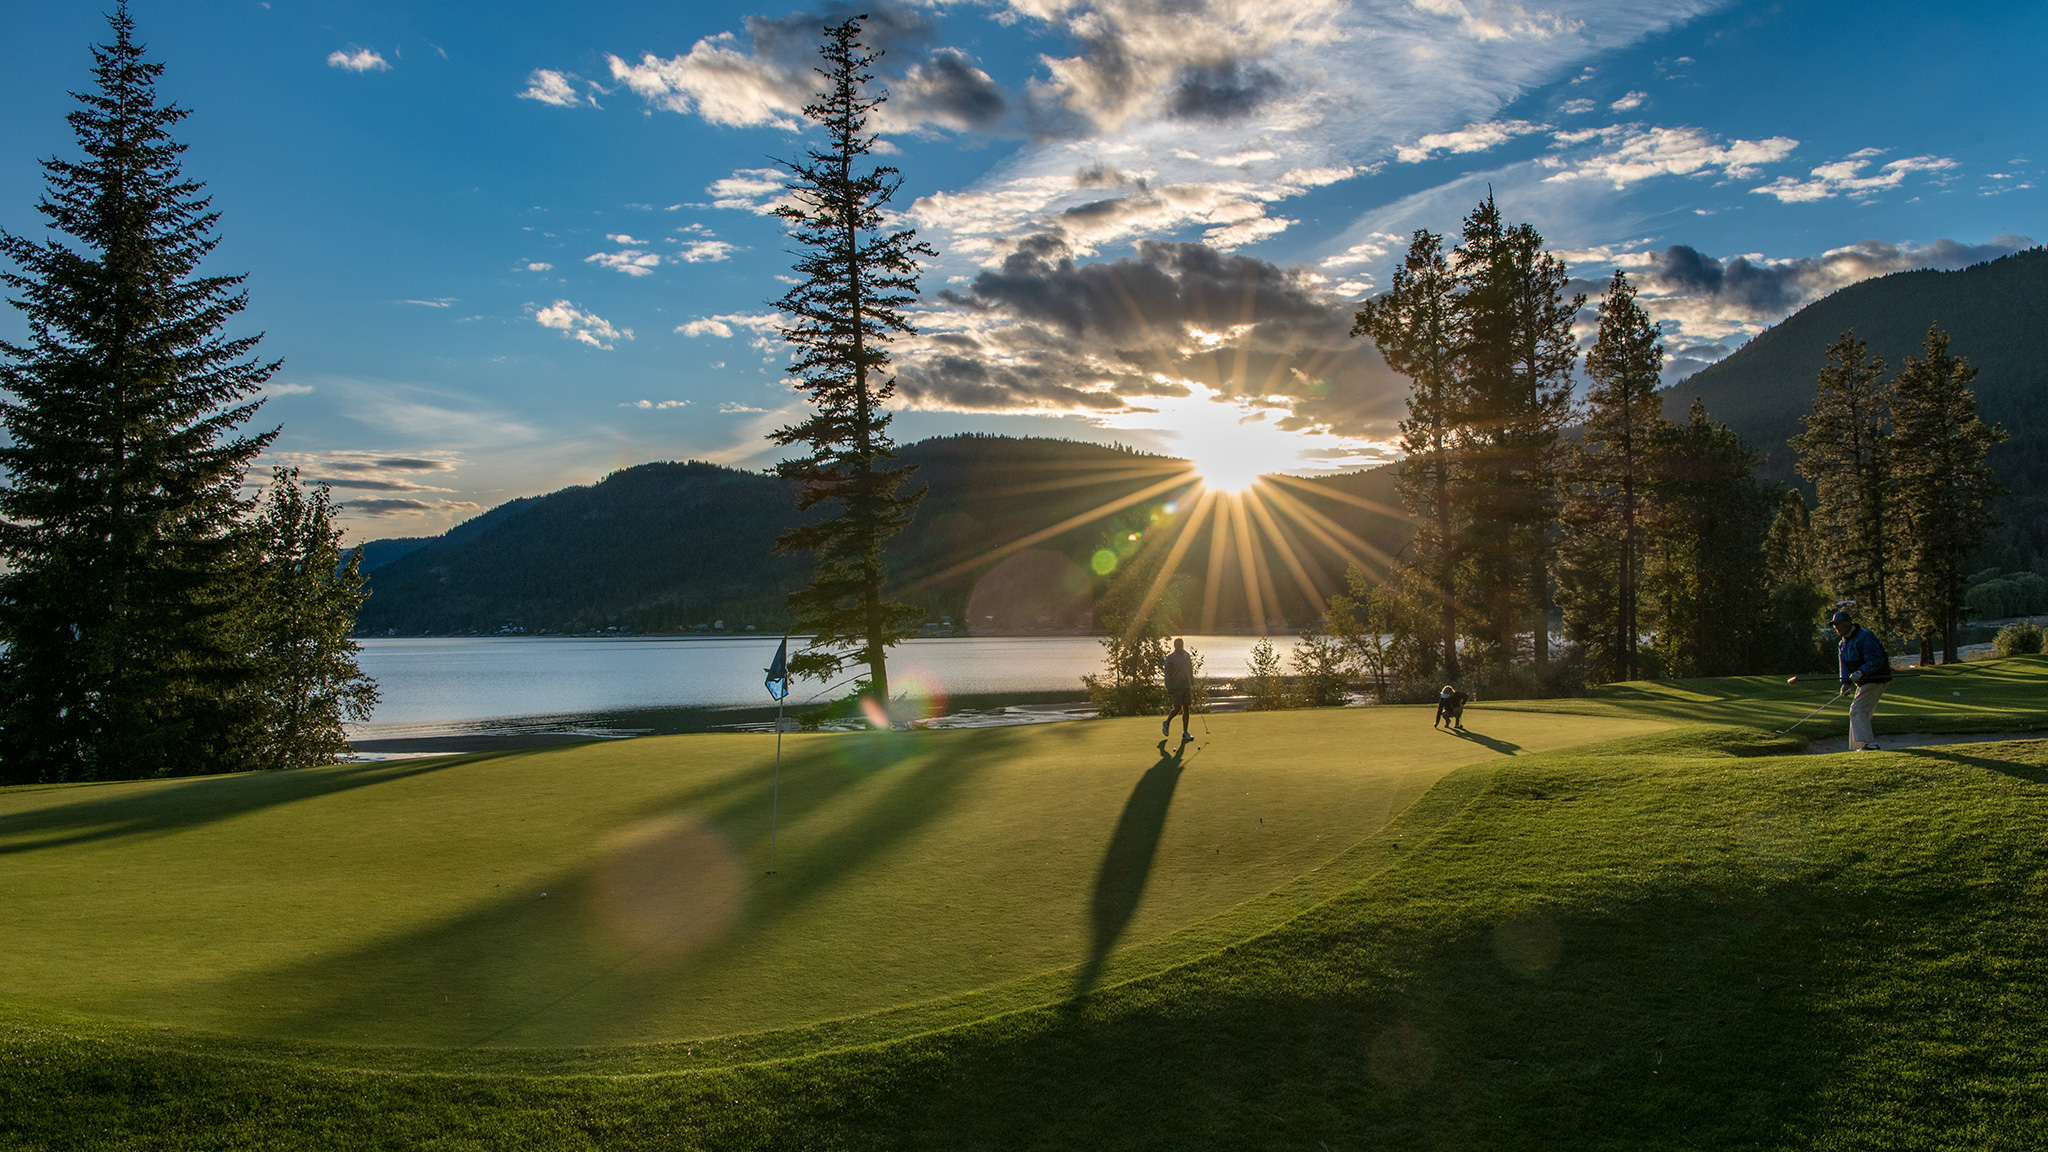 Press Release: Golf’s GDP Contribution up 14.5% Nationally to $18.2 Billion and 82.3% in BC to $3.7 Billion